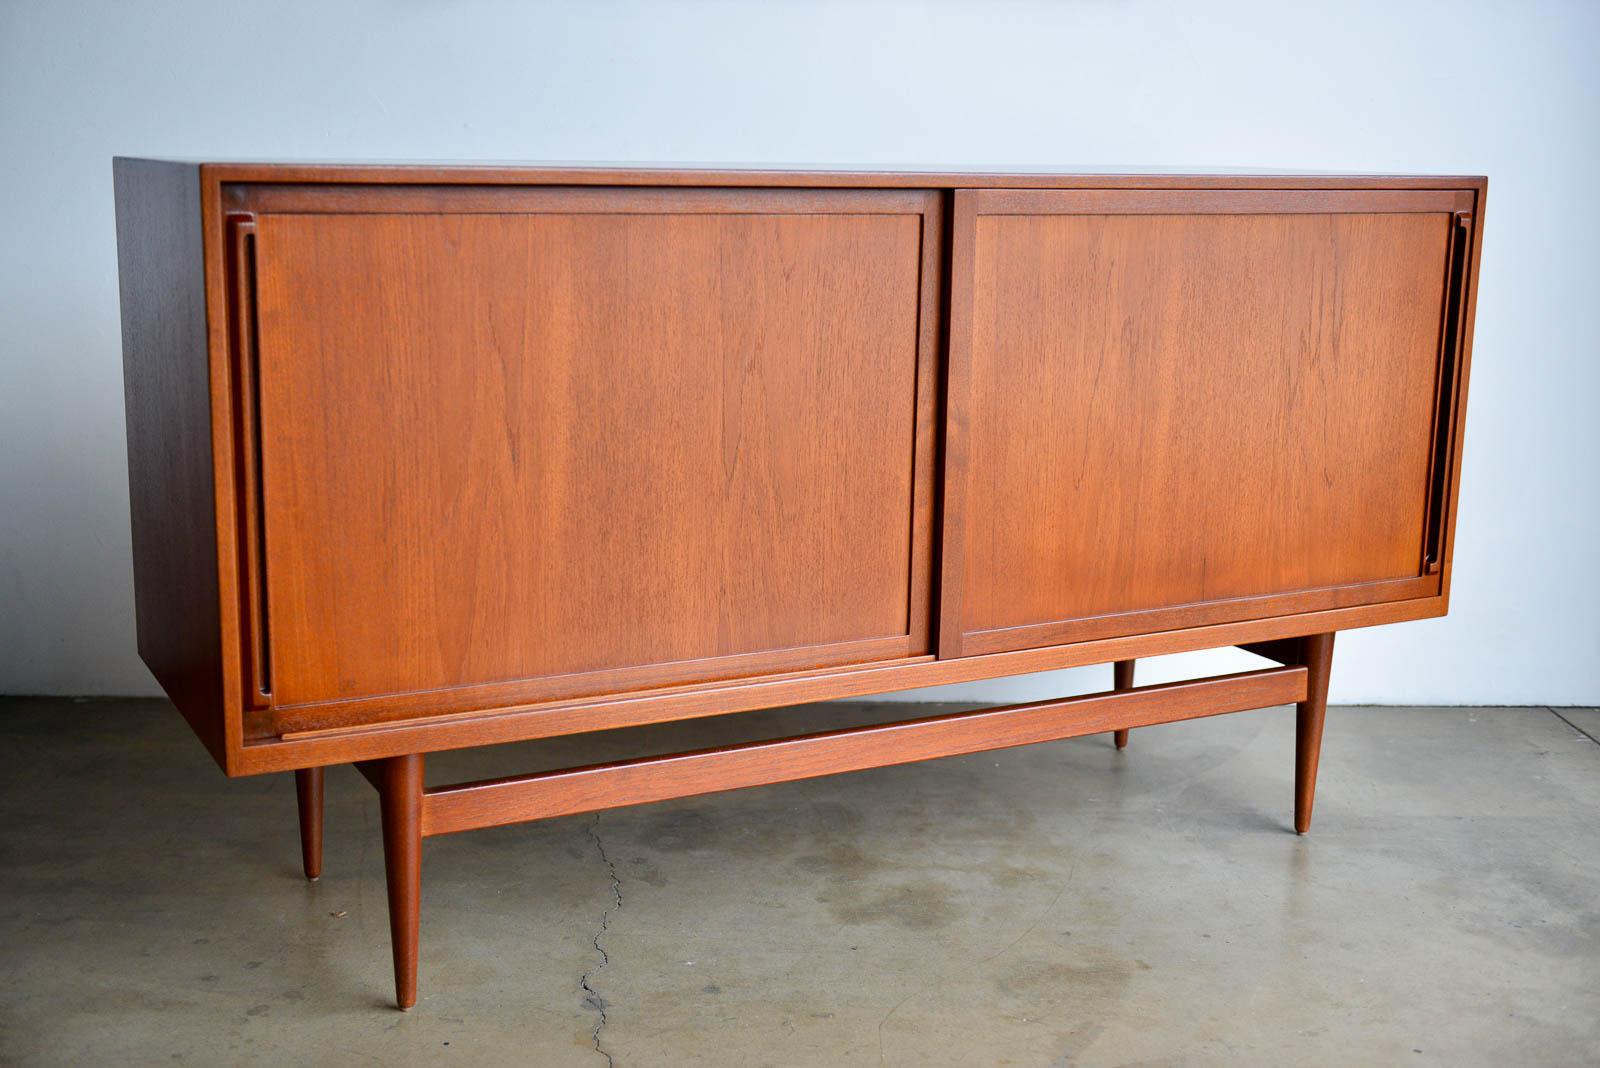 Teak credenza by Cabinetmaker Erik Worts, Denmark 1959. Purchased by original owner from Den Permanente, Copenhagen in 1959. Provenance available. Professionally restored in showroom condition this rare piece shows off the delicate base and legs